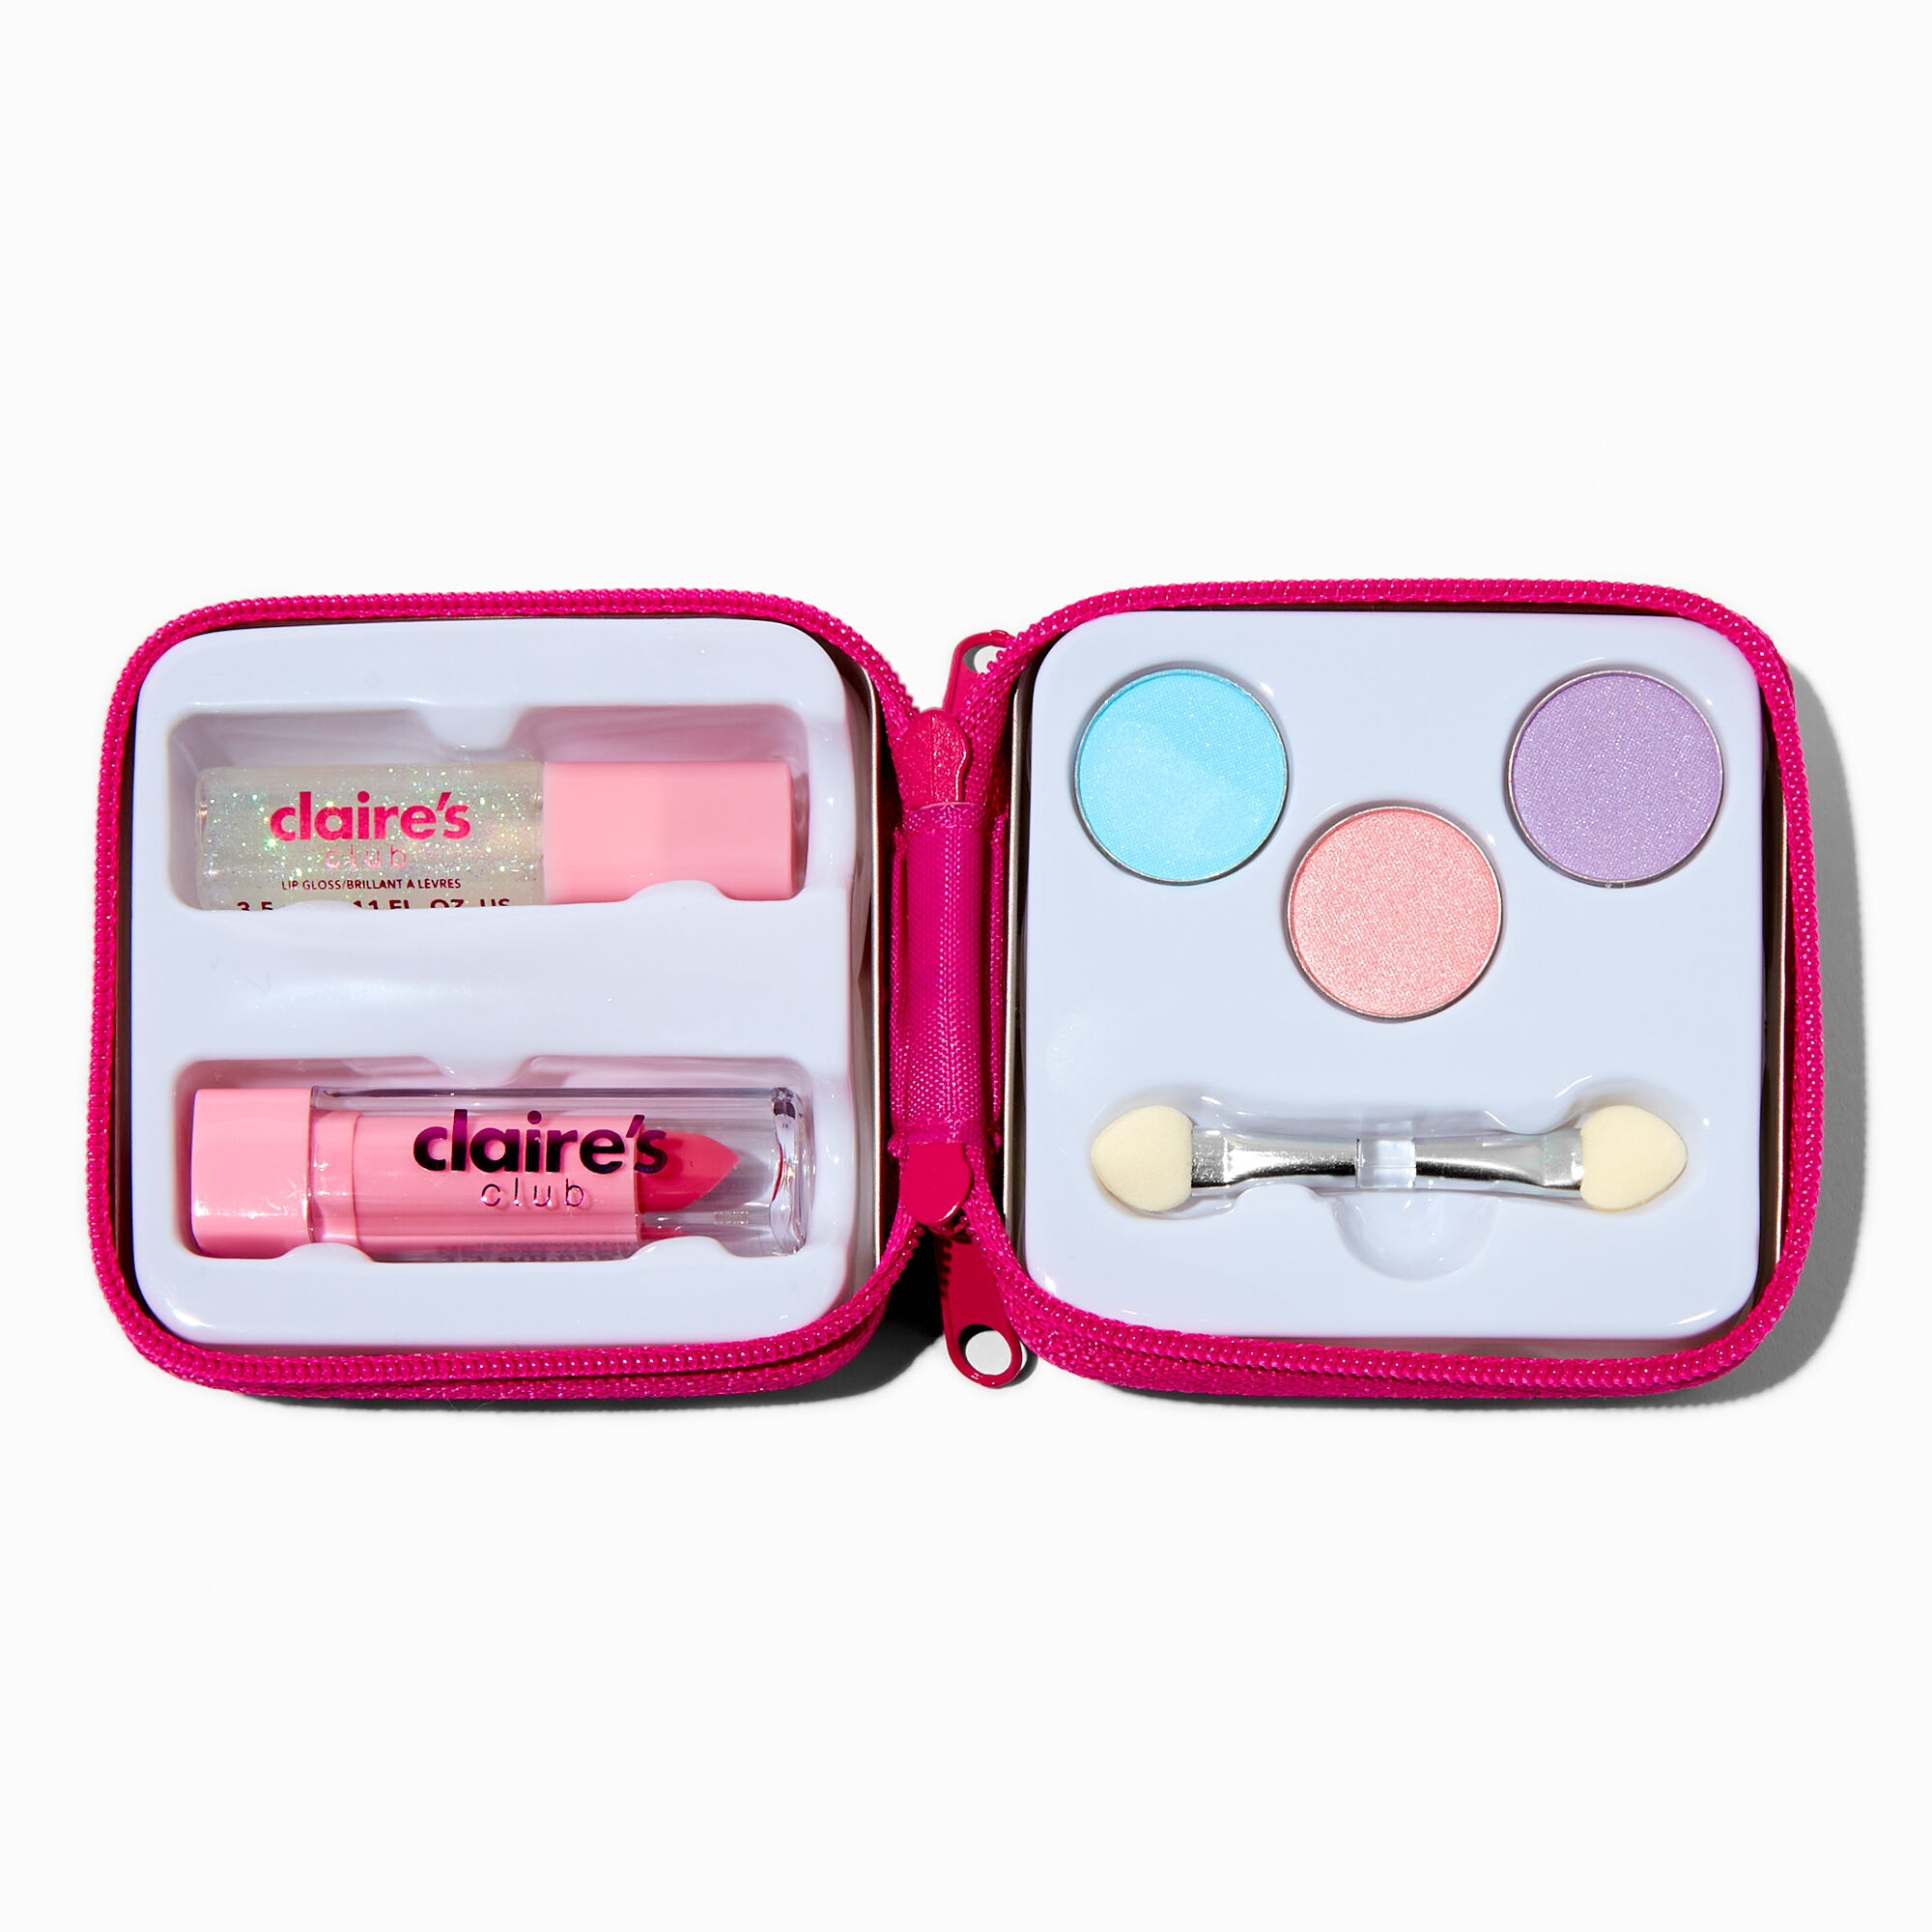 View Claires Club Sweets Mini Makeup Tin Rainbow information